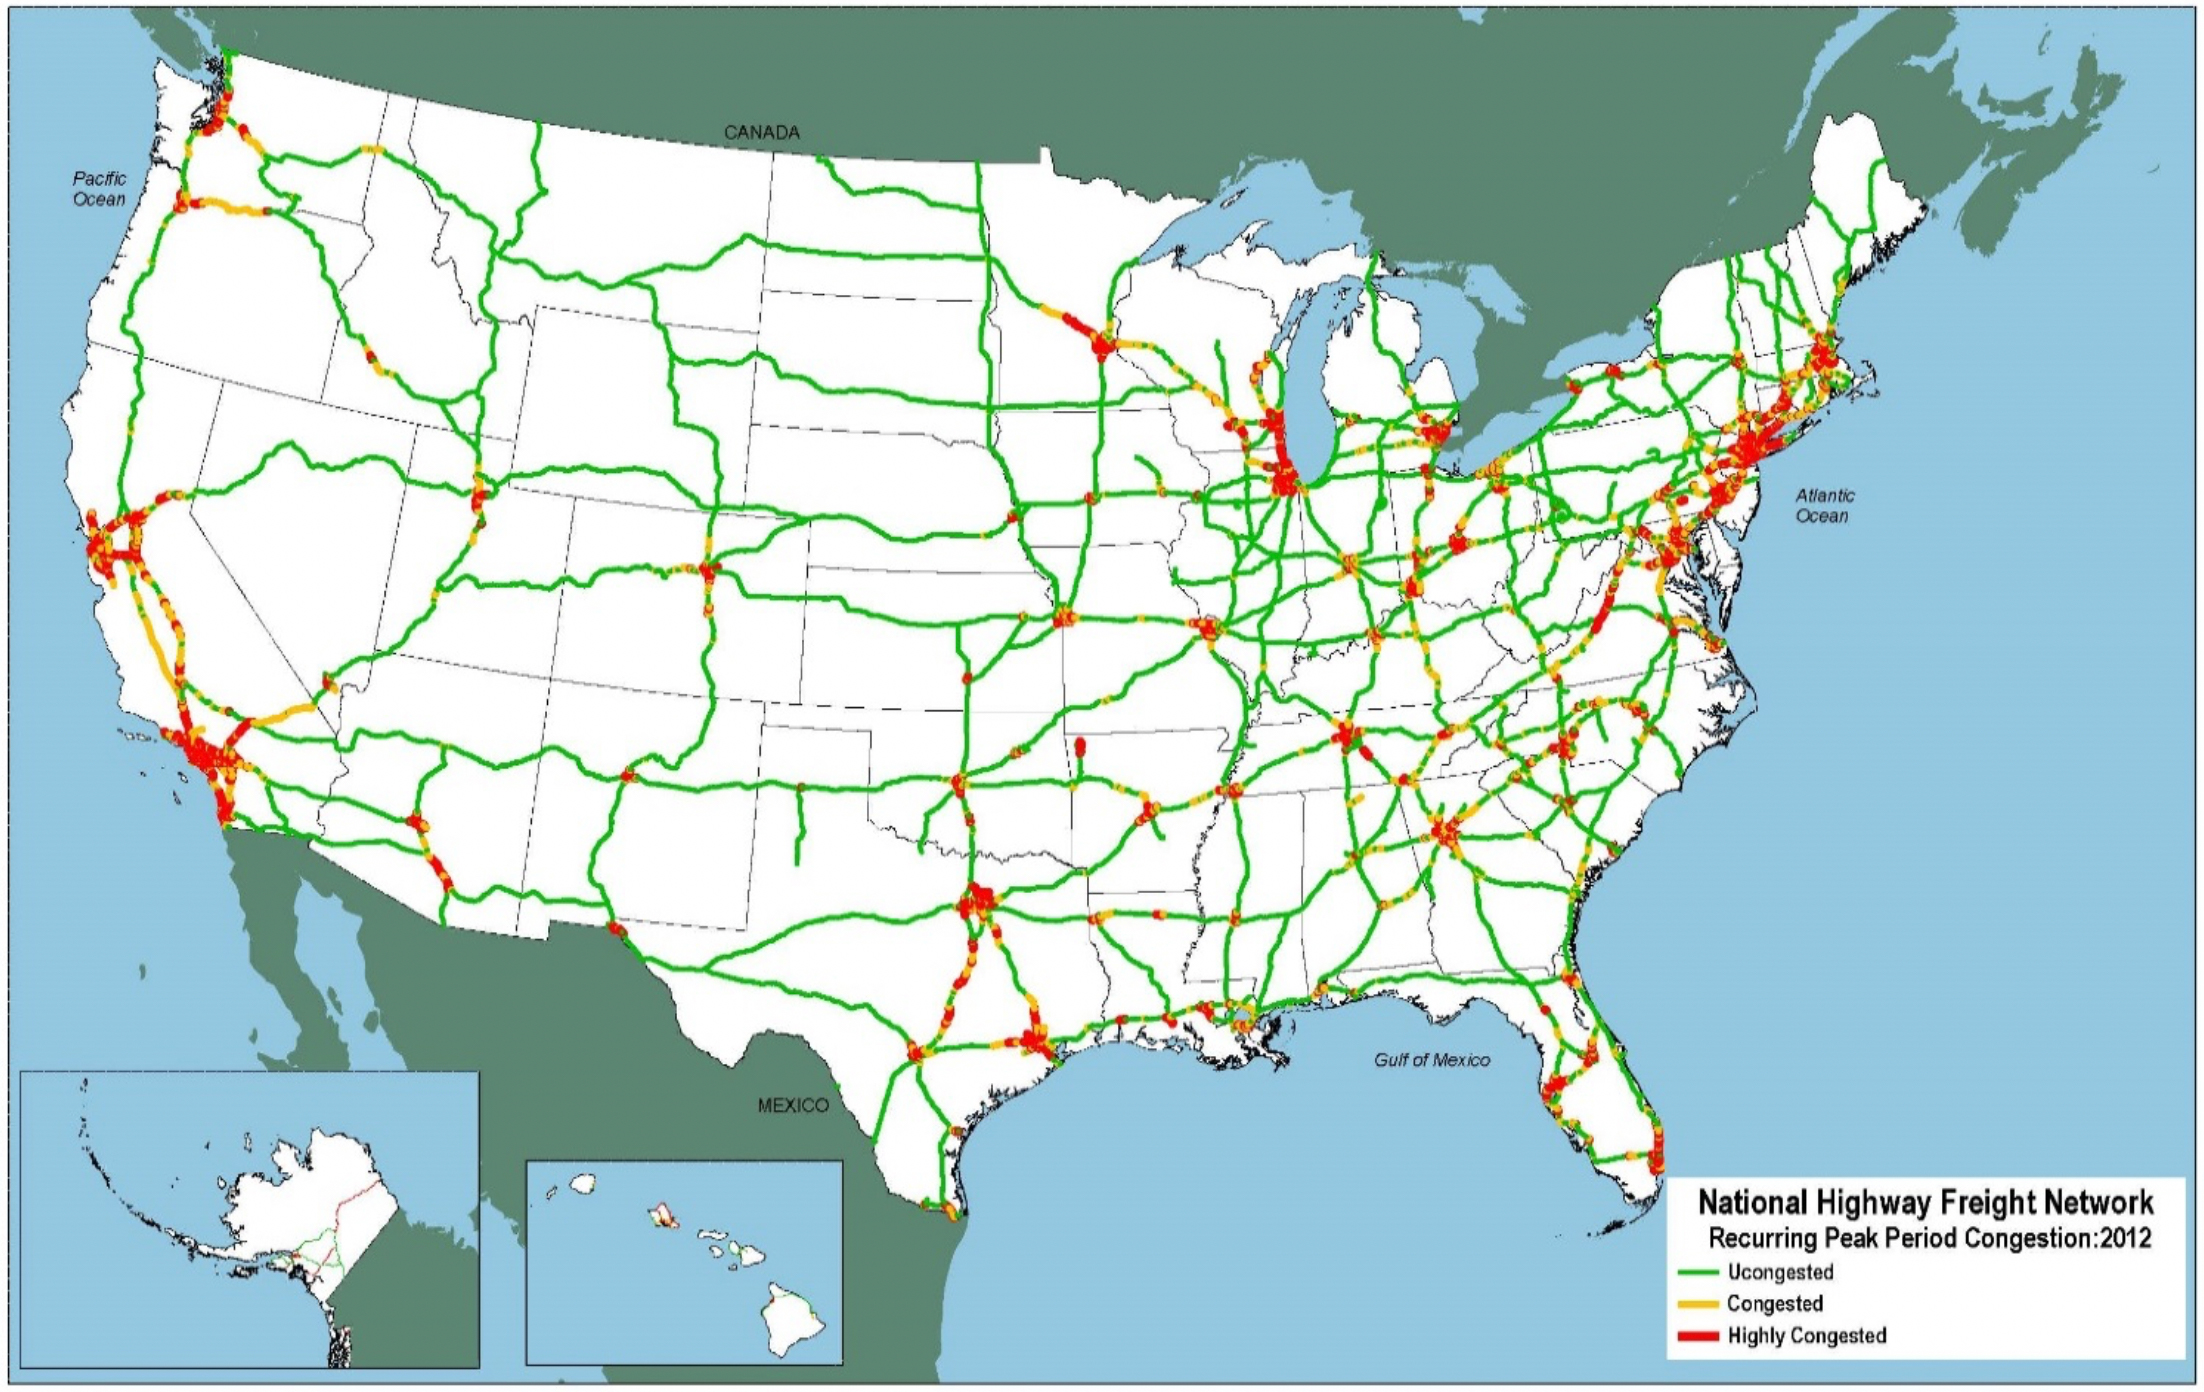 An outline map of the 48 contiguous States and insets for Alaska and Hawaii show areas of recurring peak period congestion on the NHFN in 2012, organized by uncongested, congested, or highly congested. Recurring peak period congestion occurs mostly in the Northeastern United States. Highly congested areas are primarily located in States such as New Jersey, New York, Connecticut, California, Texas, and Illinois.